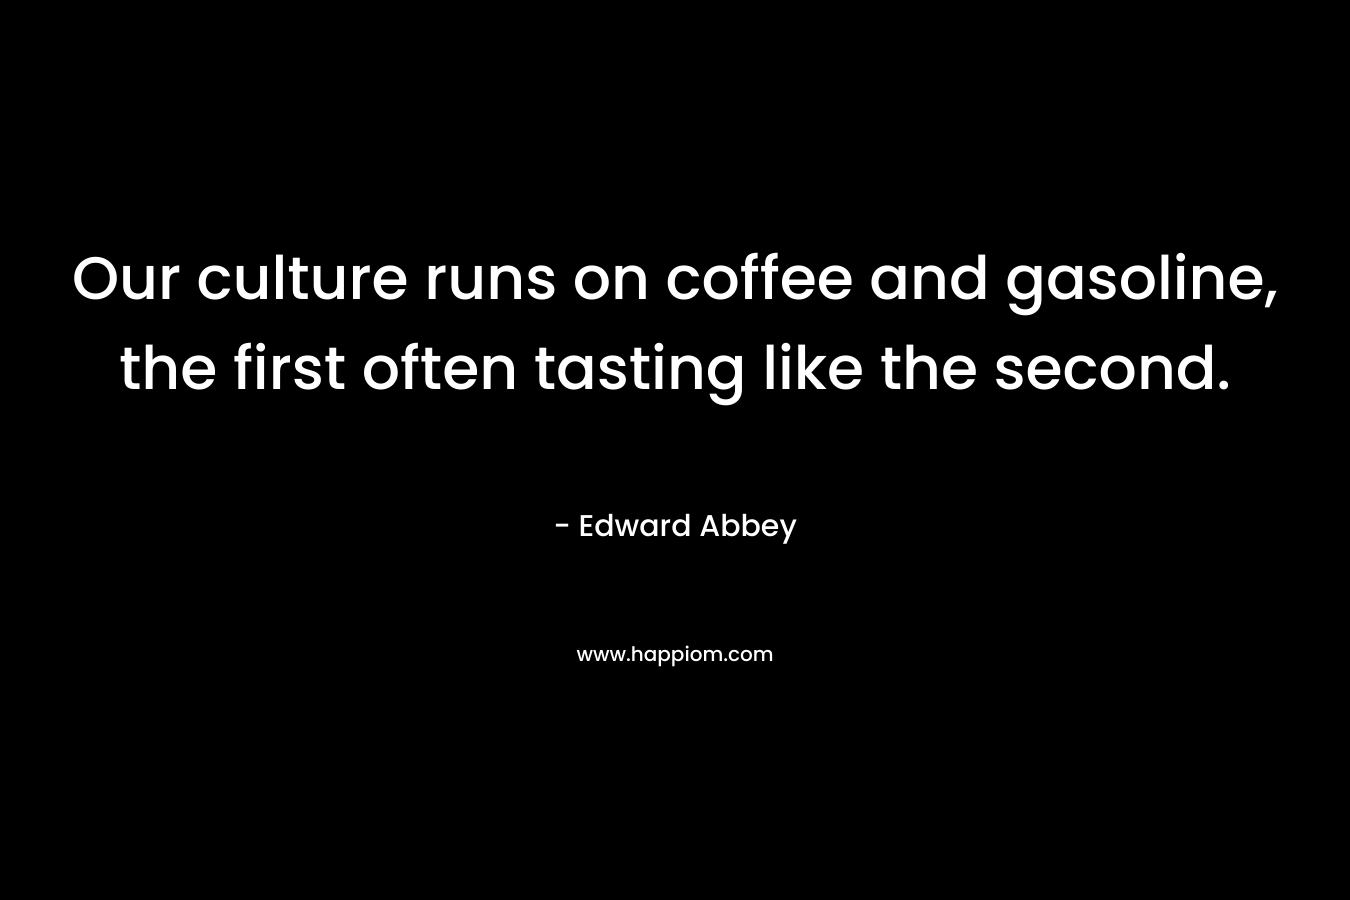 Our culture runs on coffee and gasoline, the first often tasting like the second. – Edward Abbey